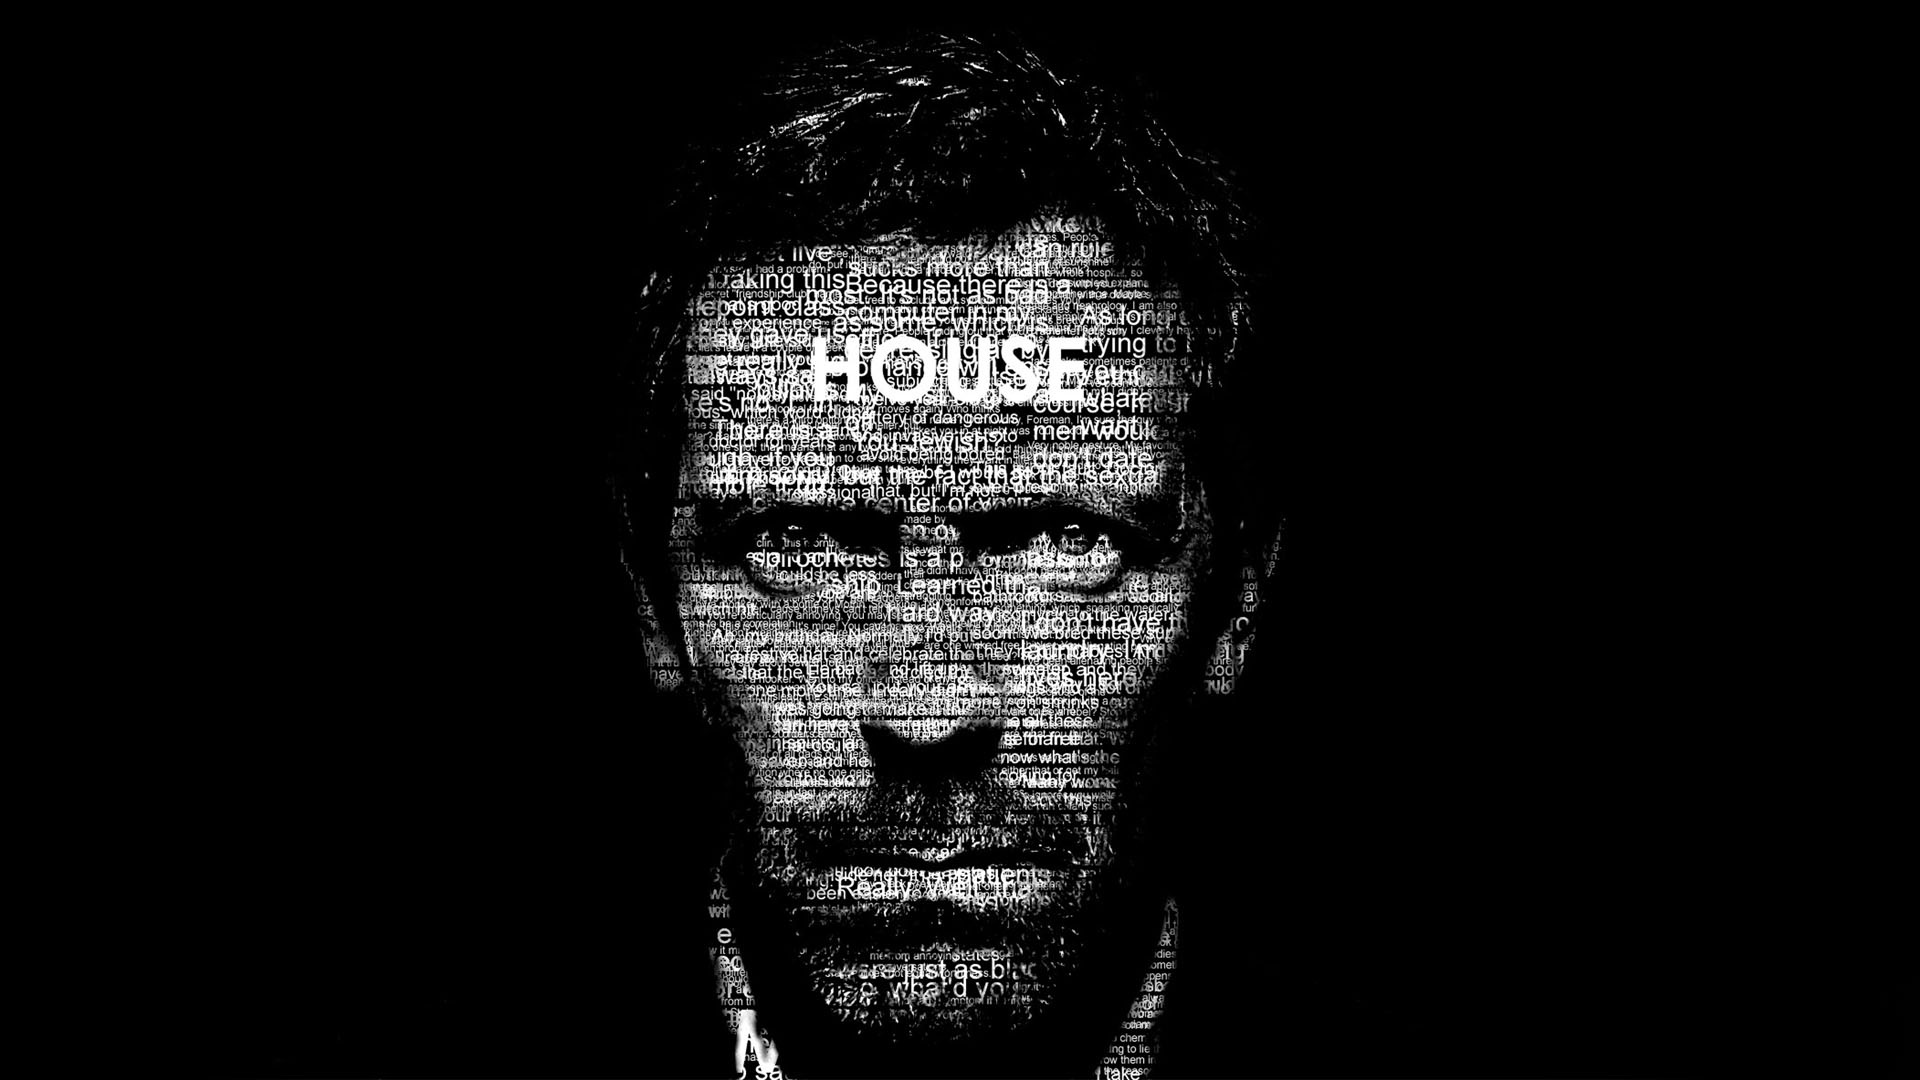  HQ House Md Massage Therapy 1920x1080 Wallpaper   HQ Wallpapers 1920x1080